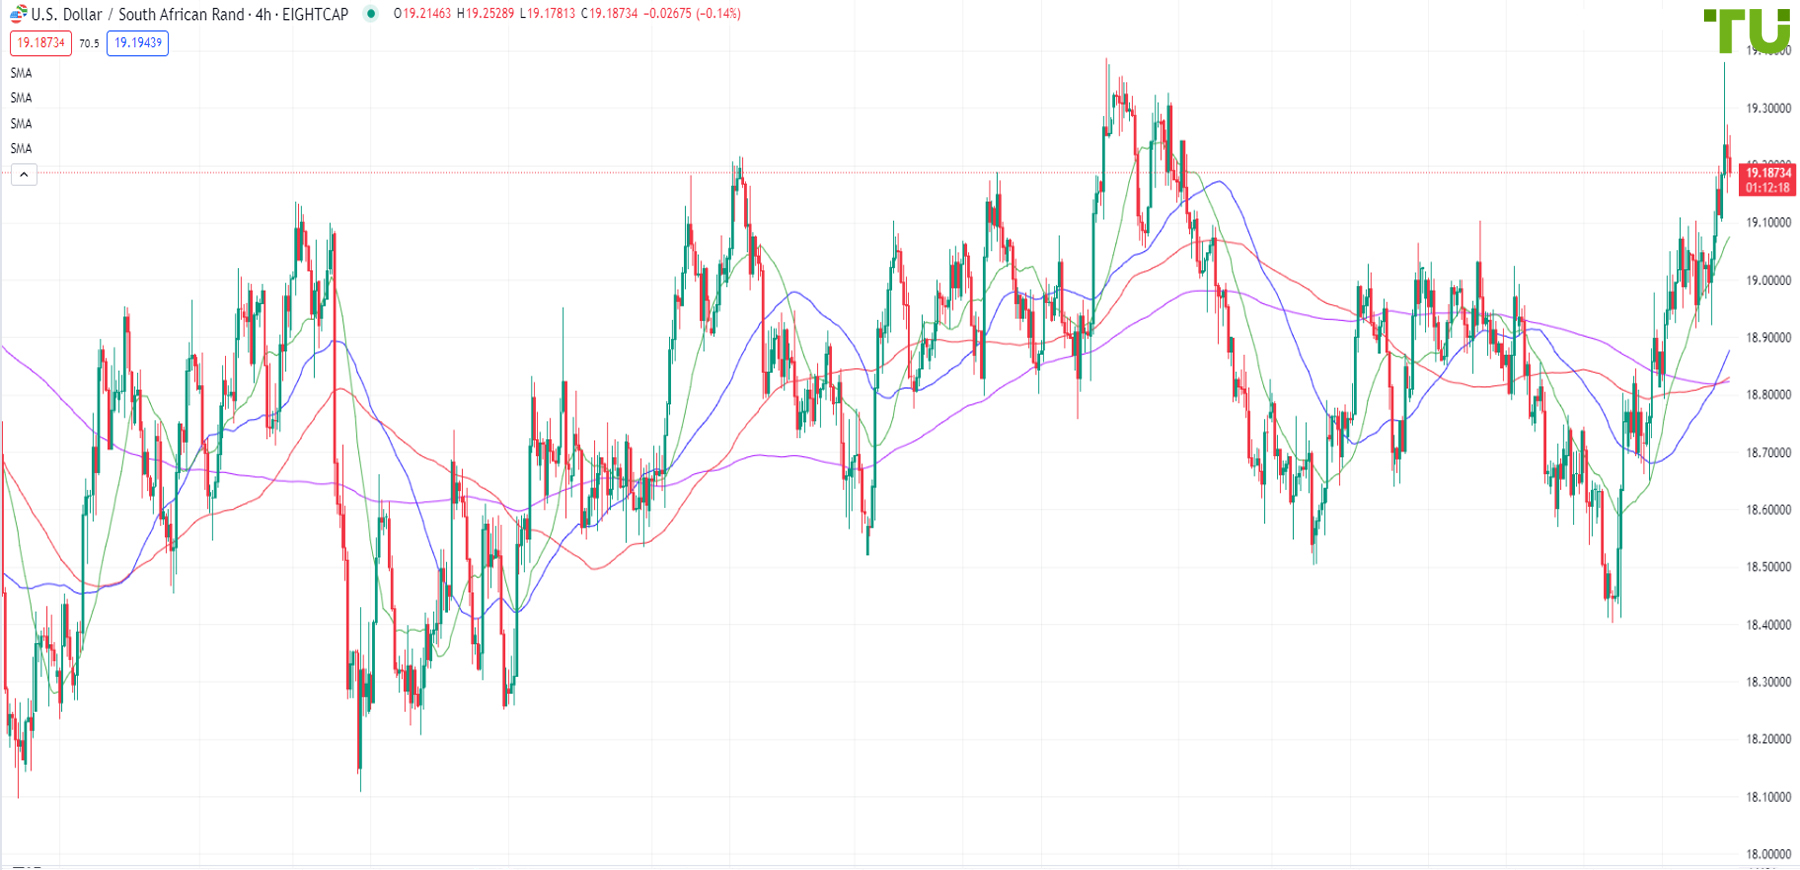 USD/ZAR tests strong resistance